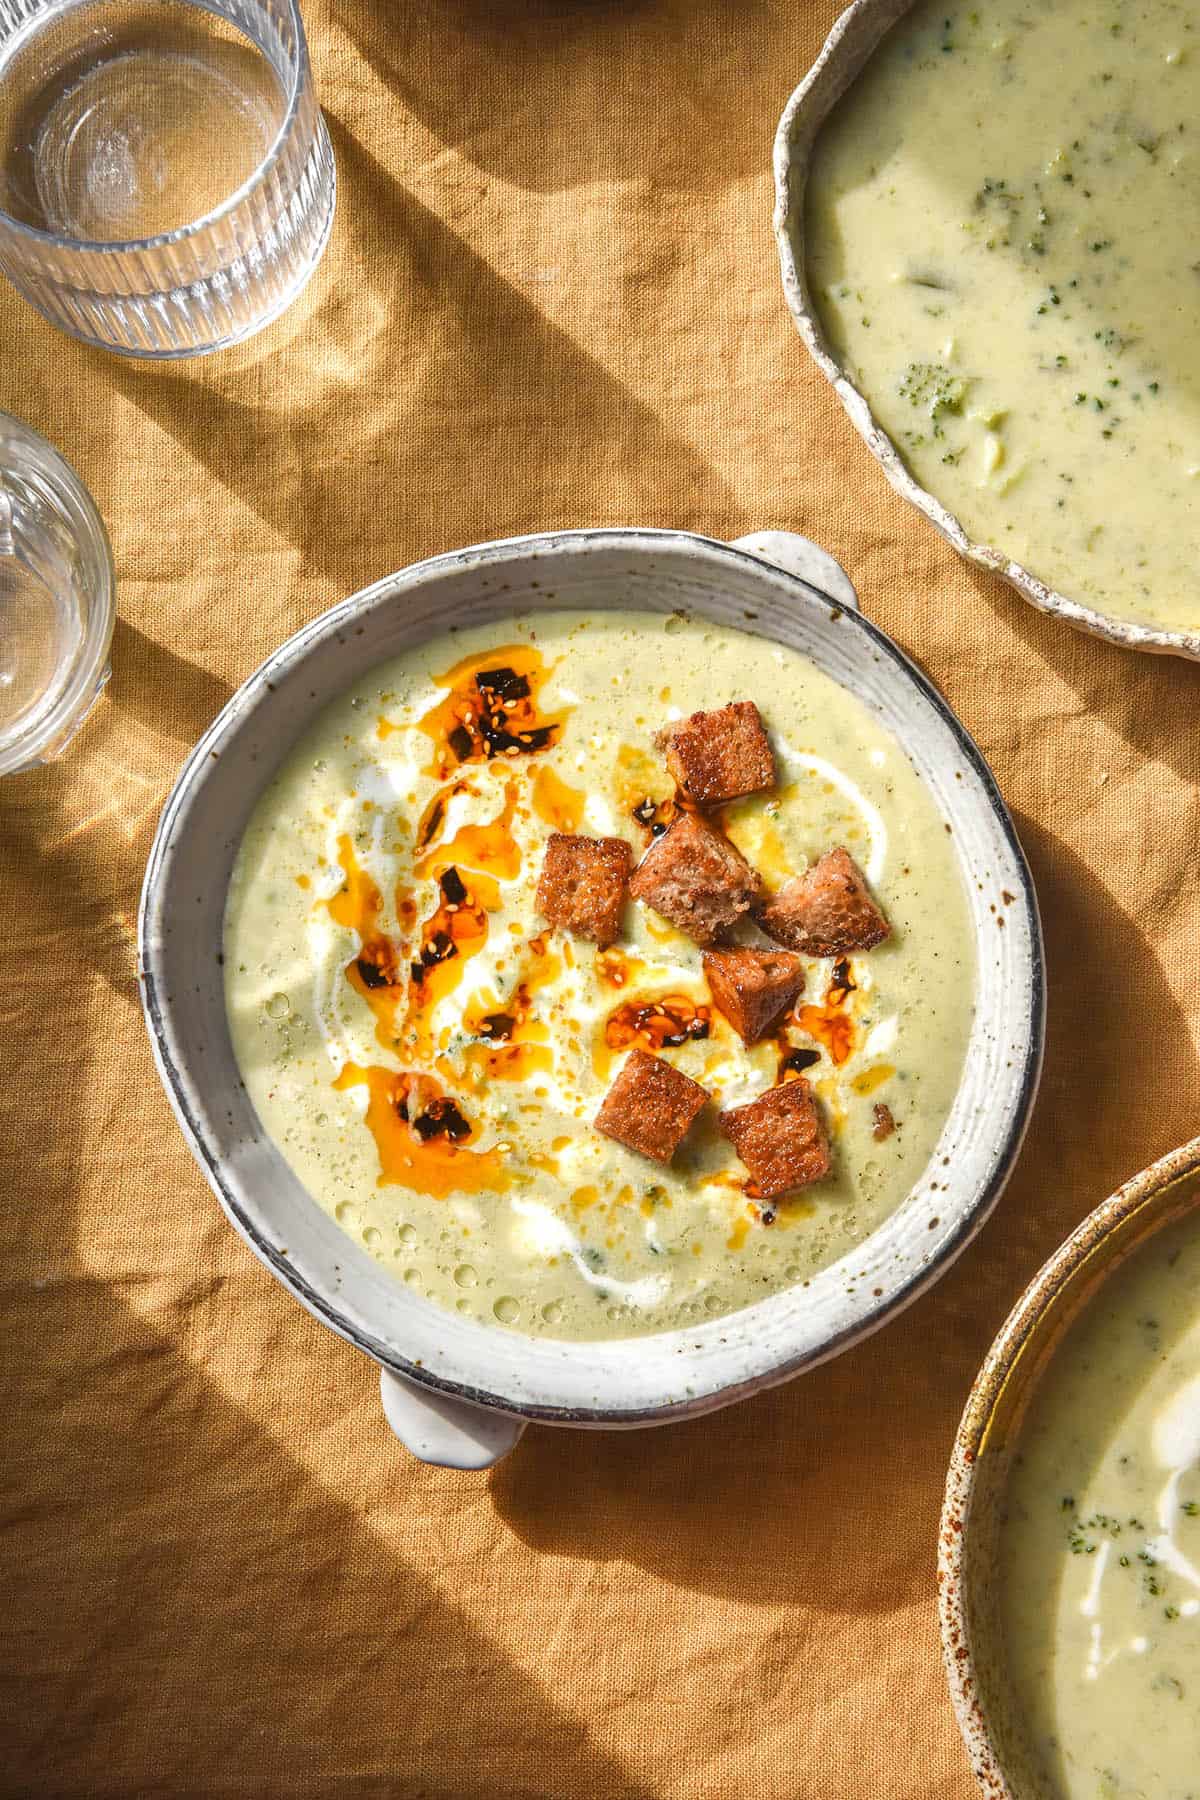 A brightly lit aerial image of broccoli cheddar soup in a white bowl atop a mustard coloured linen tablecloth. The central bowl is topped with croutons and chilli oil and surrounded by other bowls of soup and sunlit water glasses.